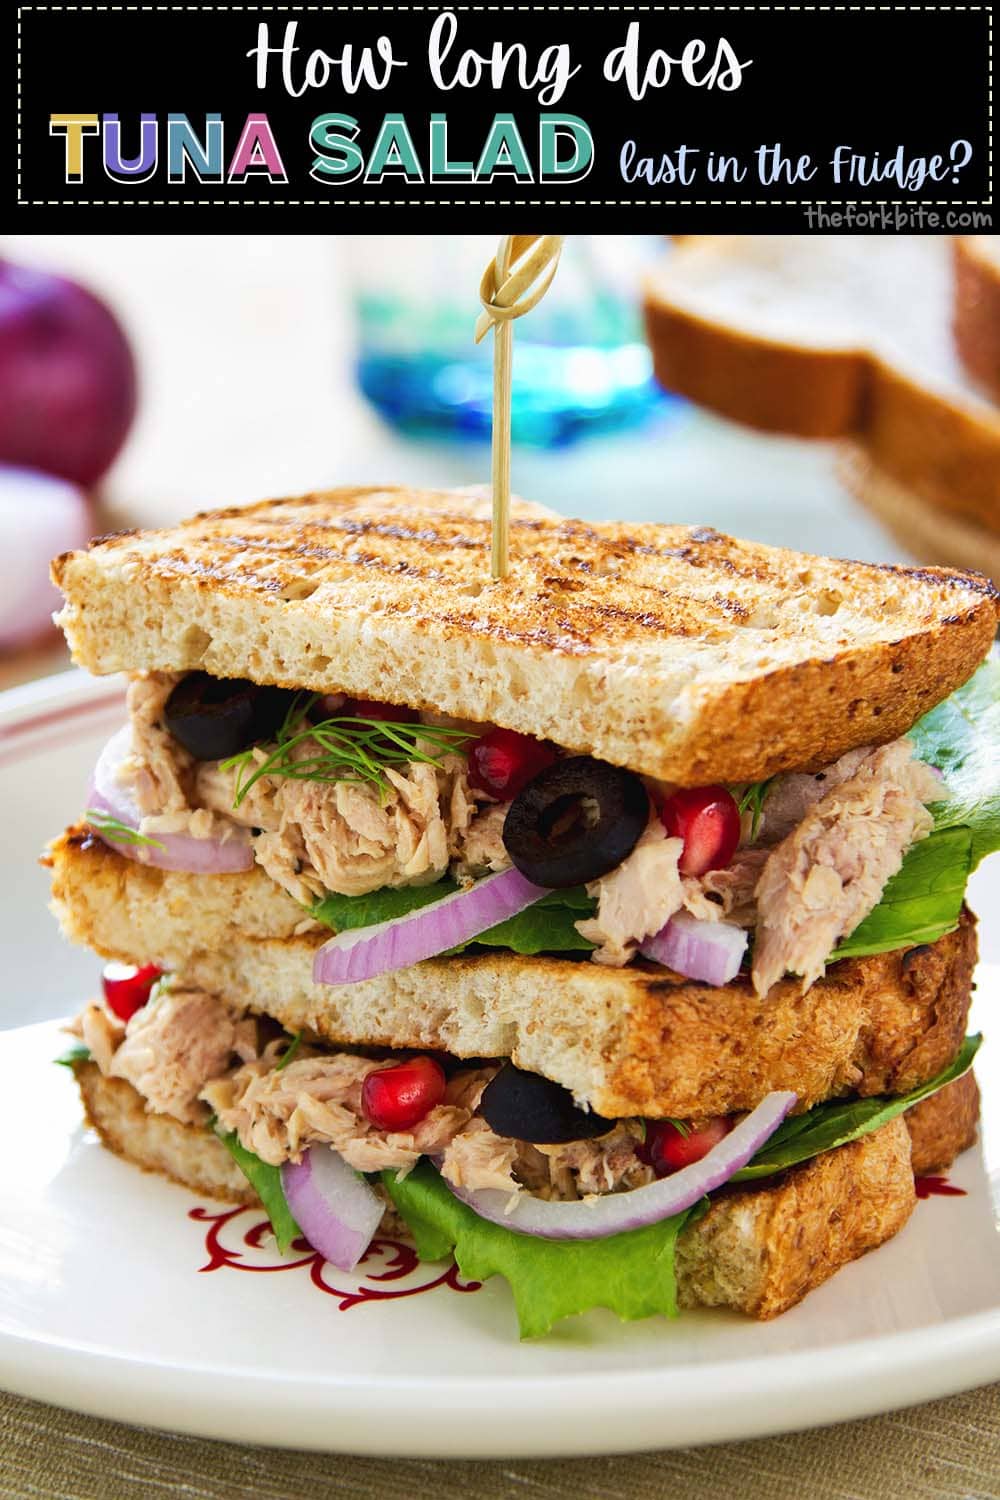 Following the USDA guidelines, the tuna salad will last for about 3 to 5 days in the fridge if being stored at temperature of 40°F or below.